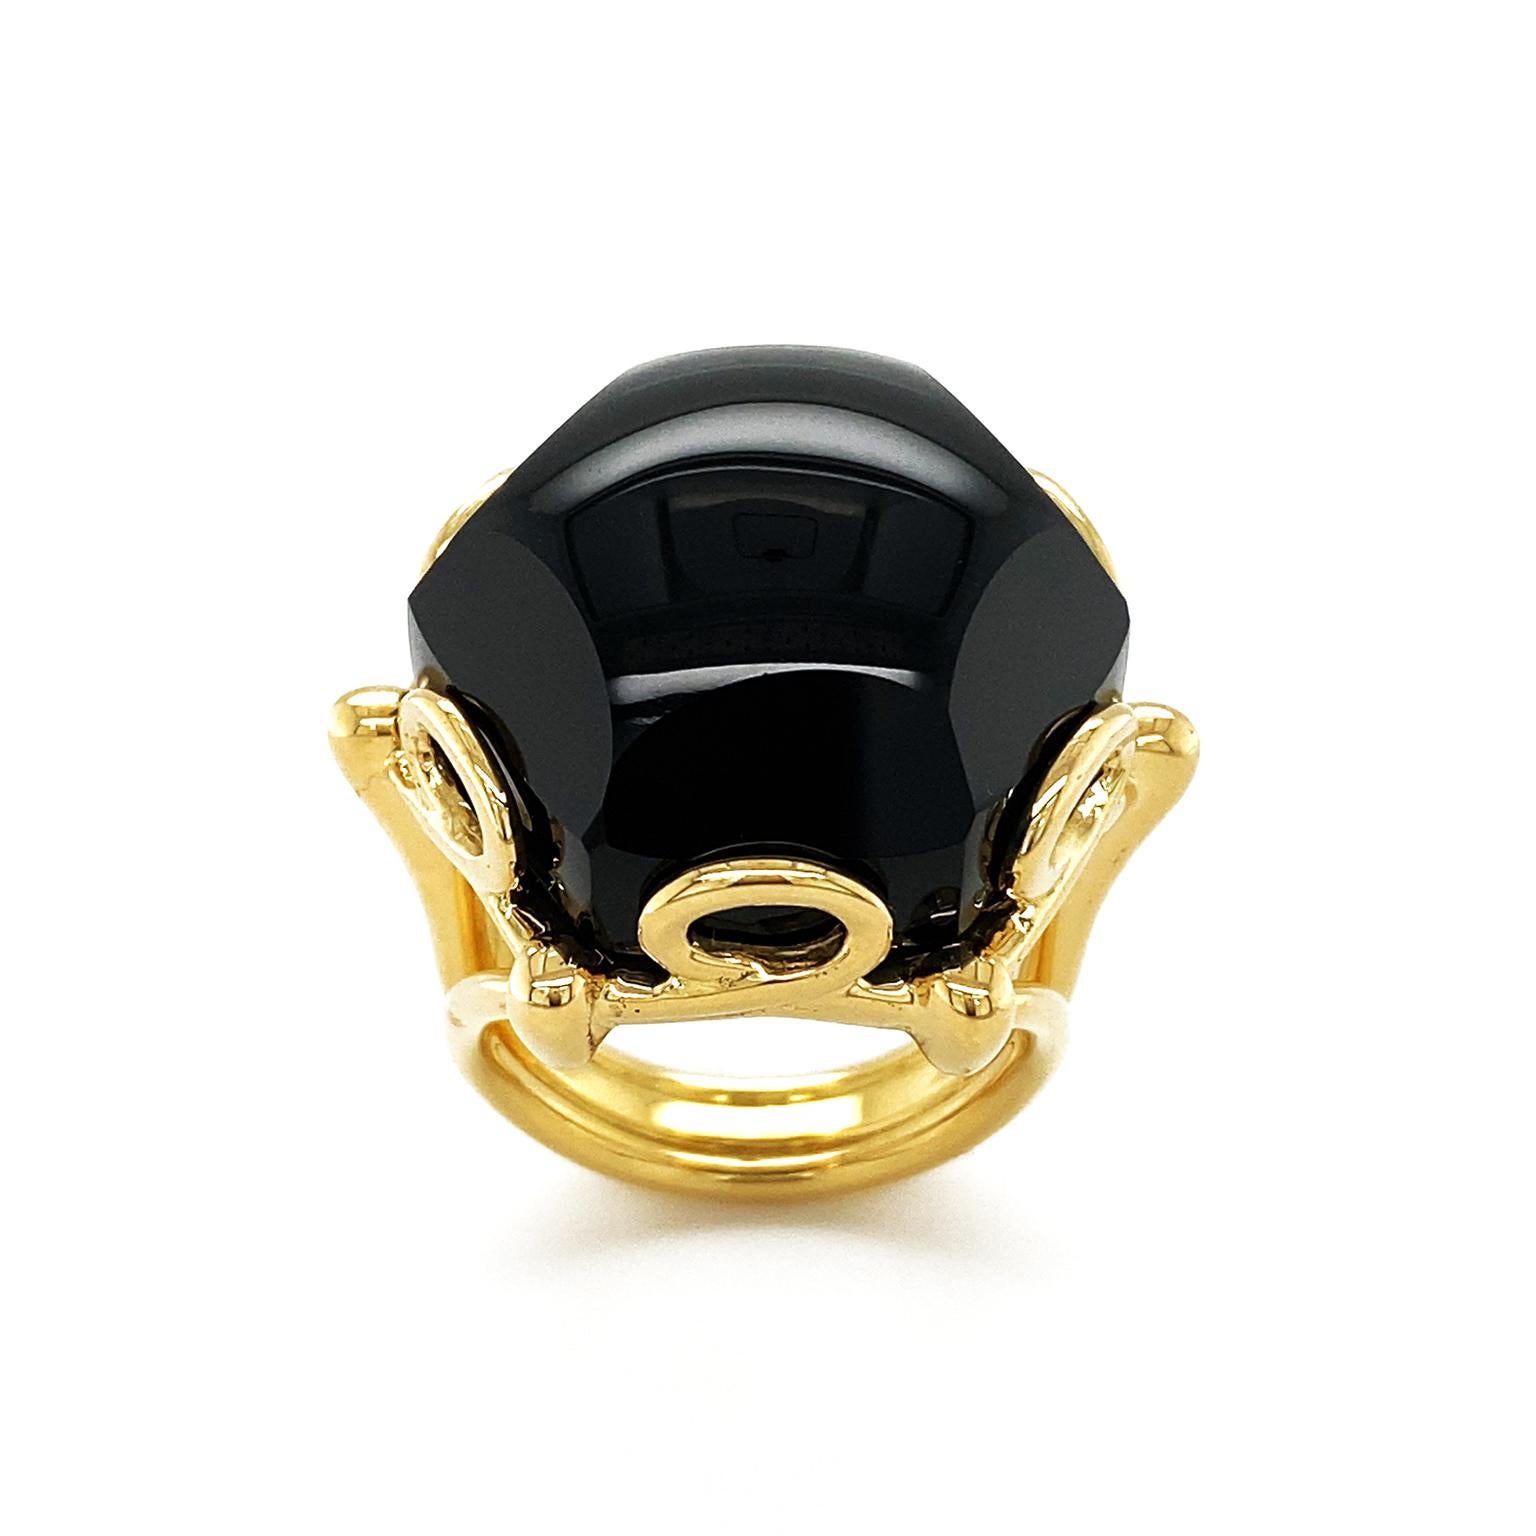 Black onyx showcases its sleek charm in this ring. 18k yellow gold loops to trim and secure the polished gem, while the triple split band provides a daring accent. The weight of the onyx is 36.06 carats and the ring measures 1.02 inches (width) by